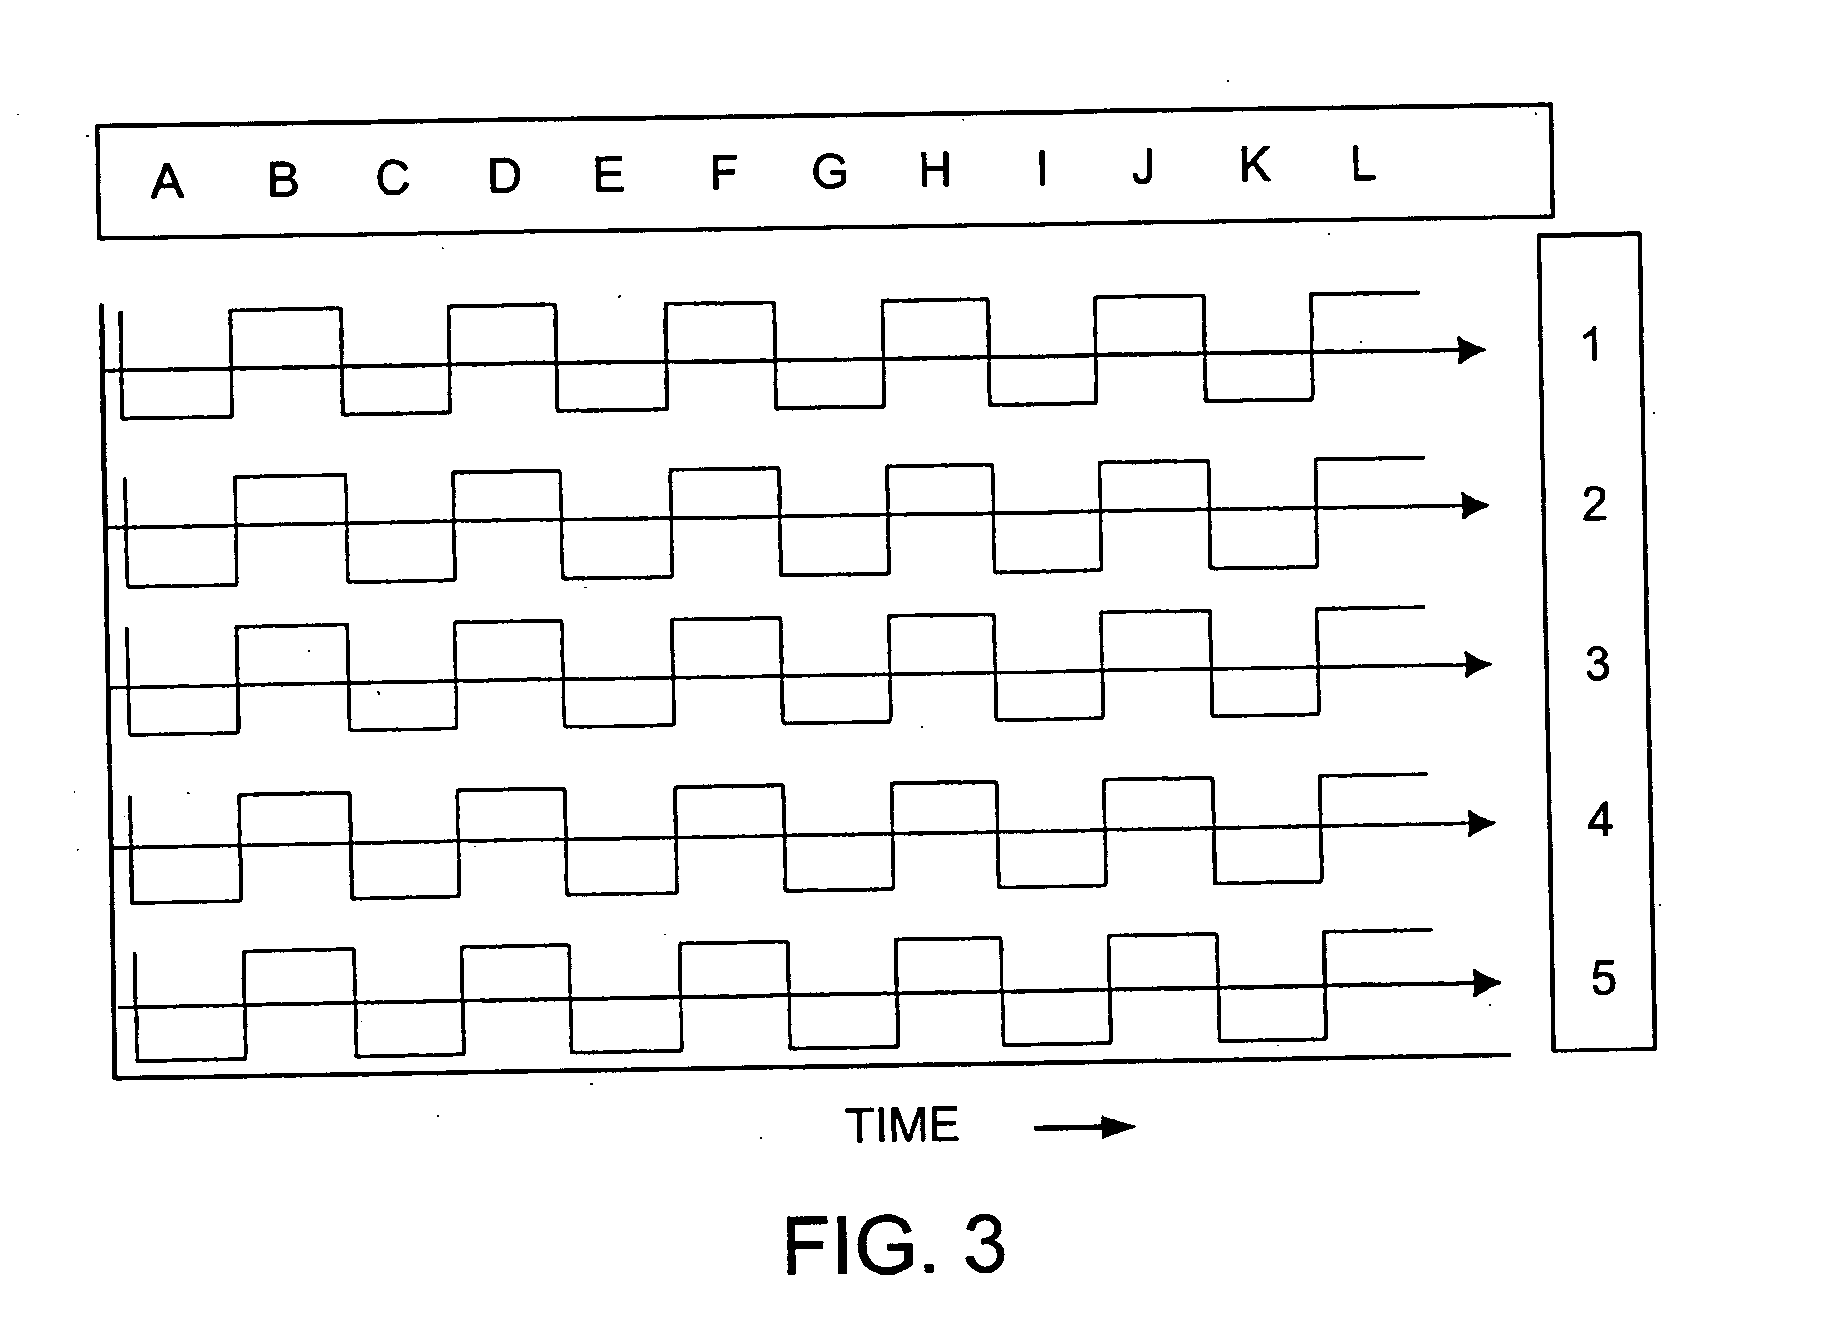 Calculating apparatus having a plurality of stages